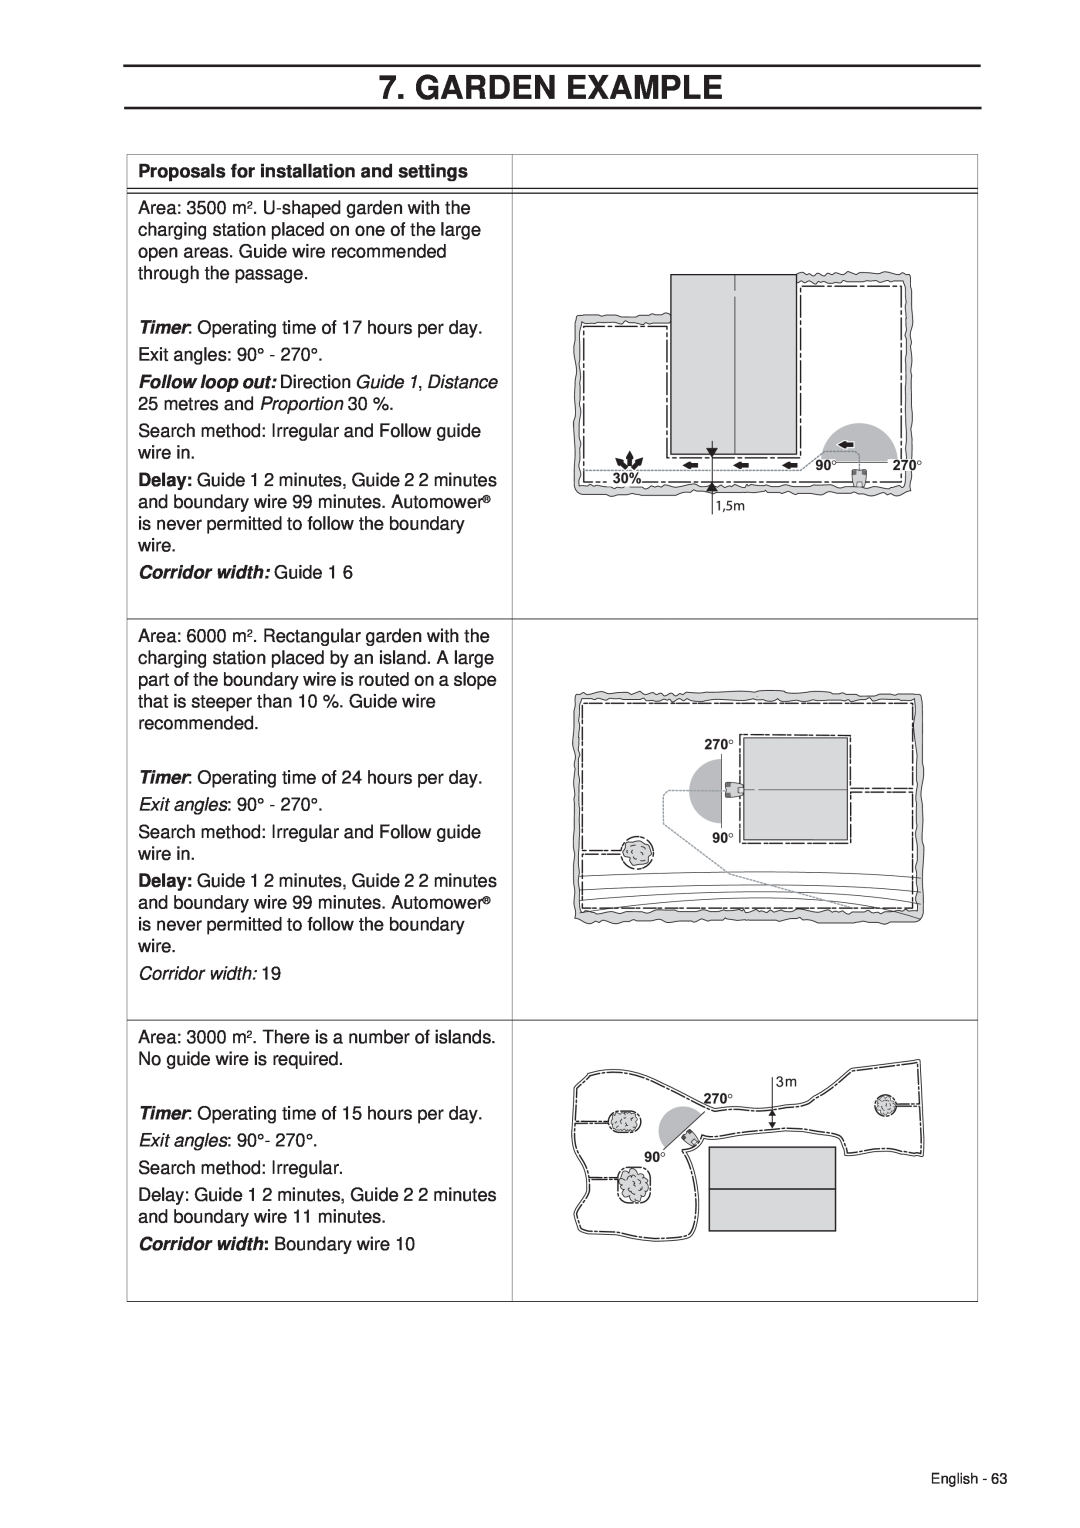 Husqvarna 265 ACX manual Corridor width Guide 1, Garden Example, Proposals for installation and settings 